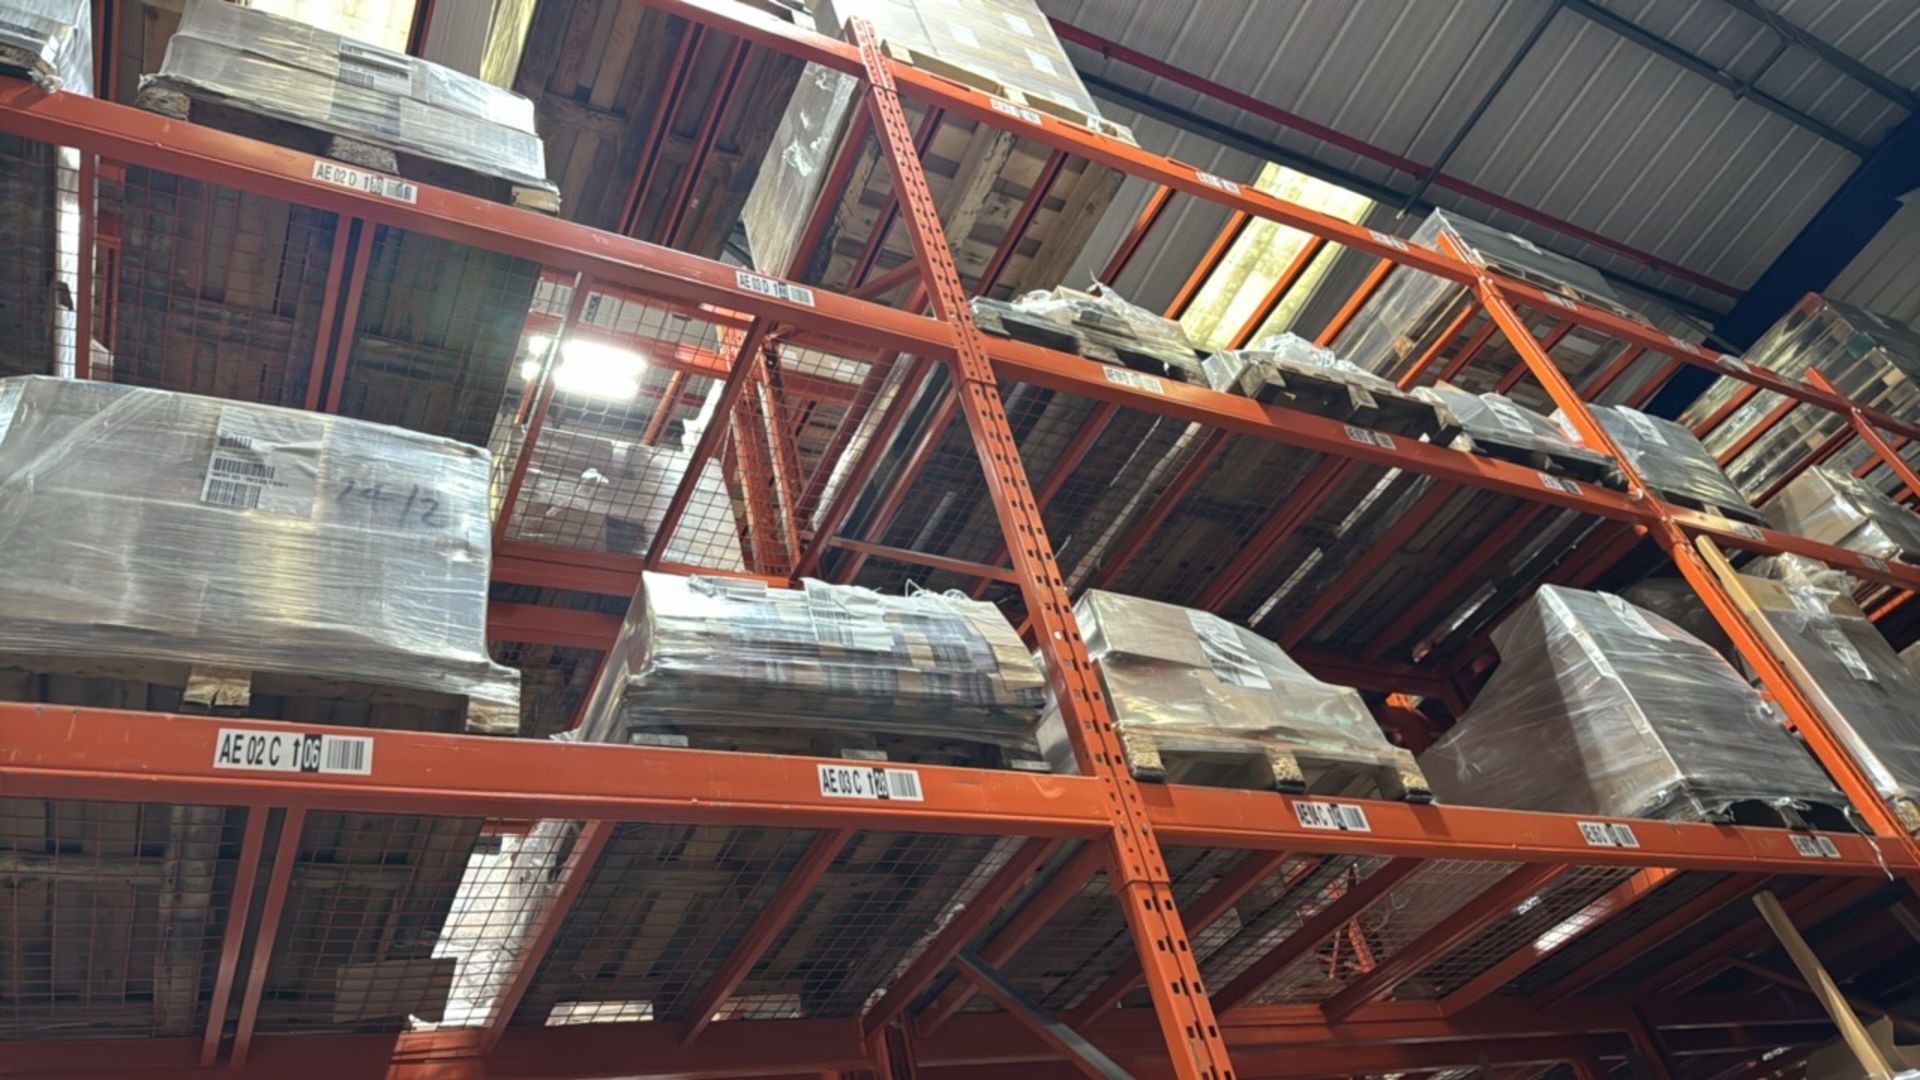 23 Bays Of Boltless Pallet Racking - Image 5 of 9